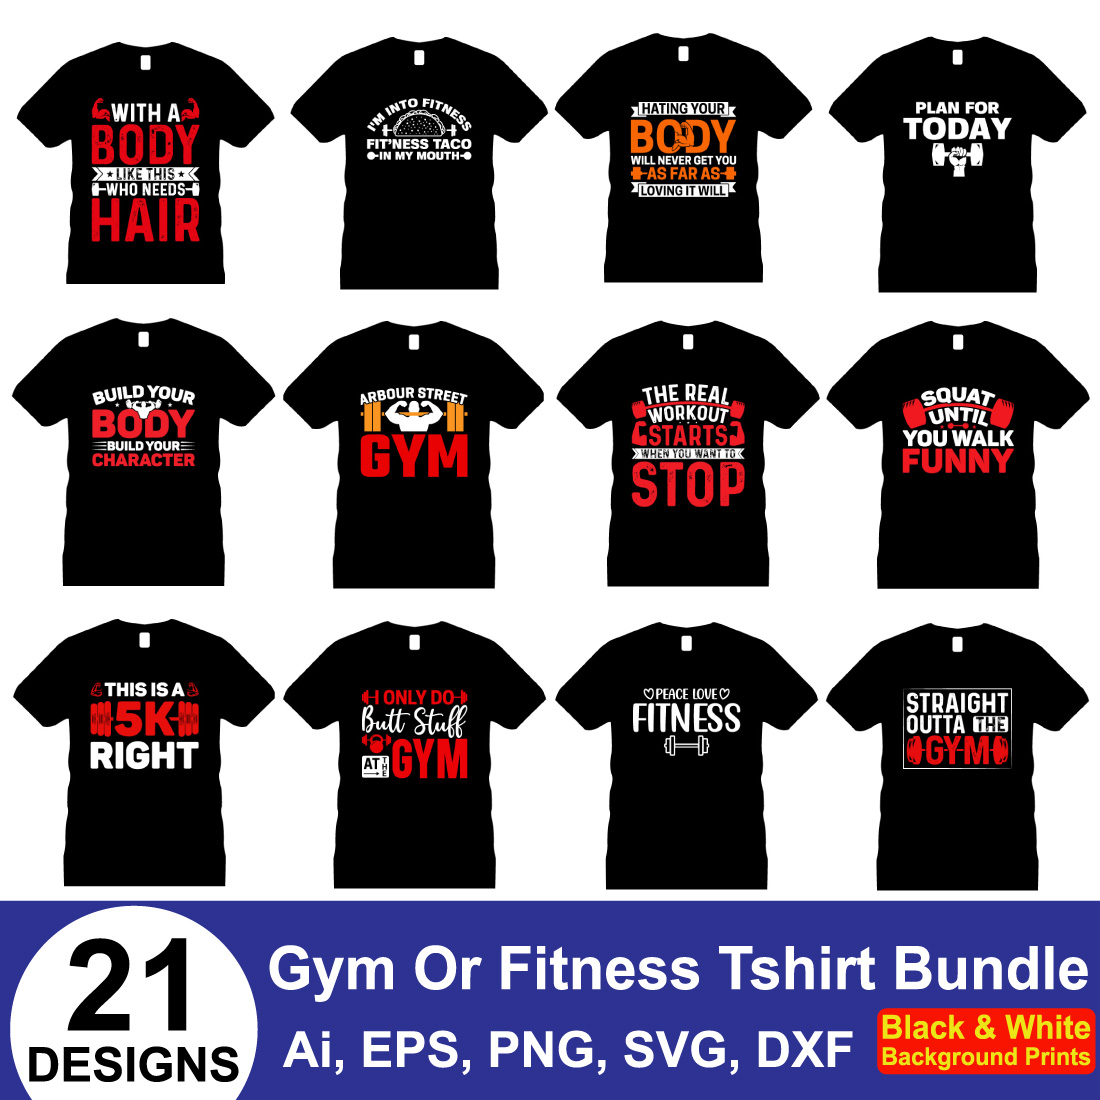 Gym or Fitness T-shirt Design cover image.